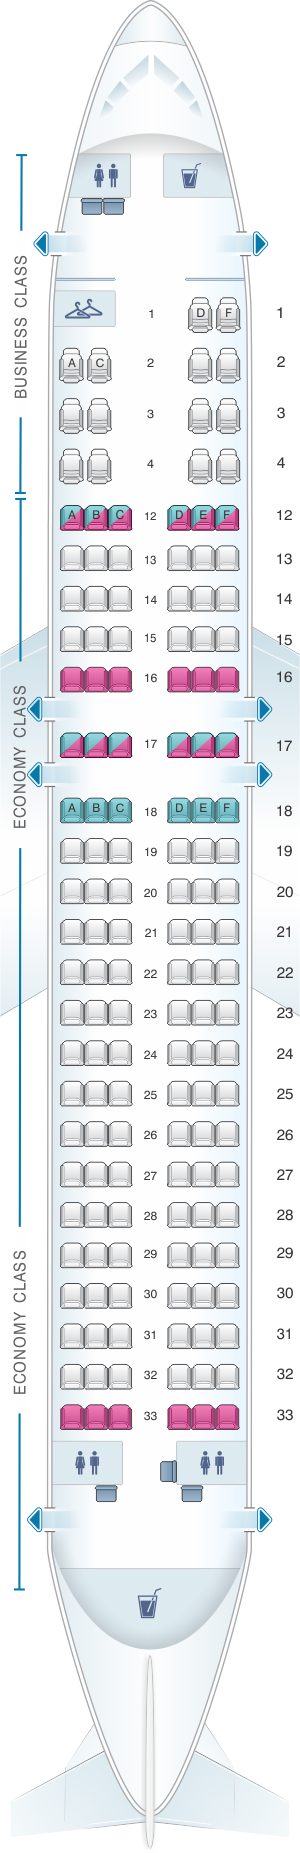 Seat map for Air Canada Airbus A320 200